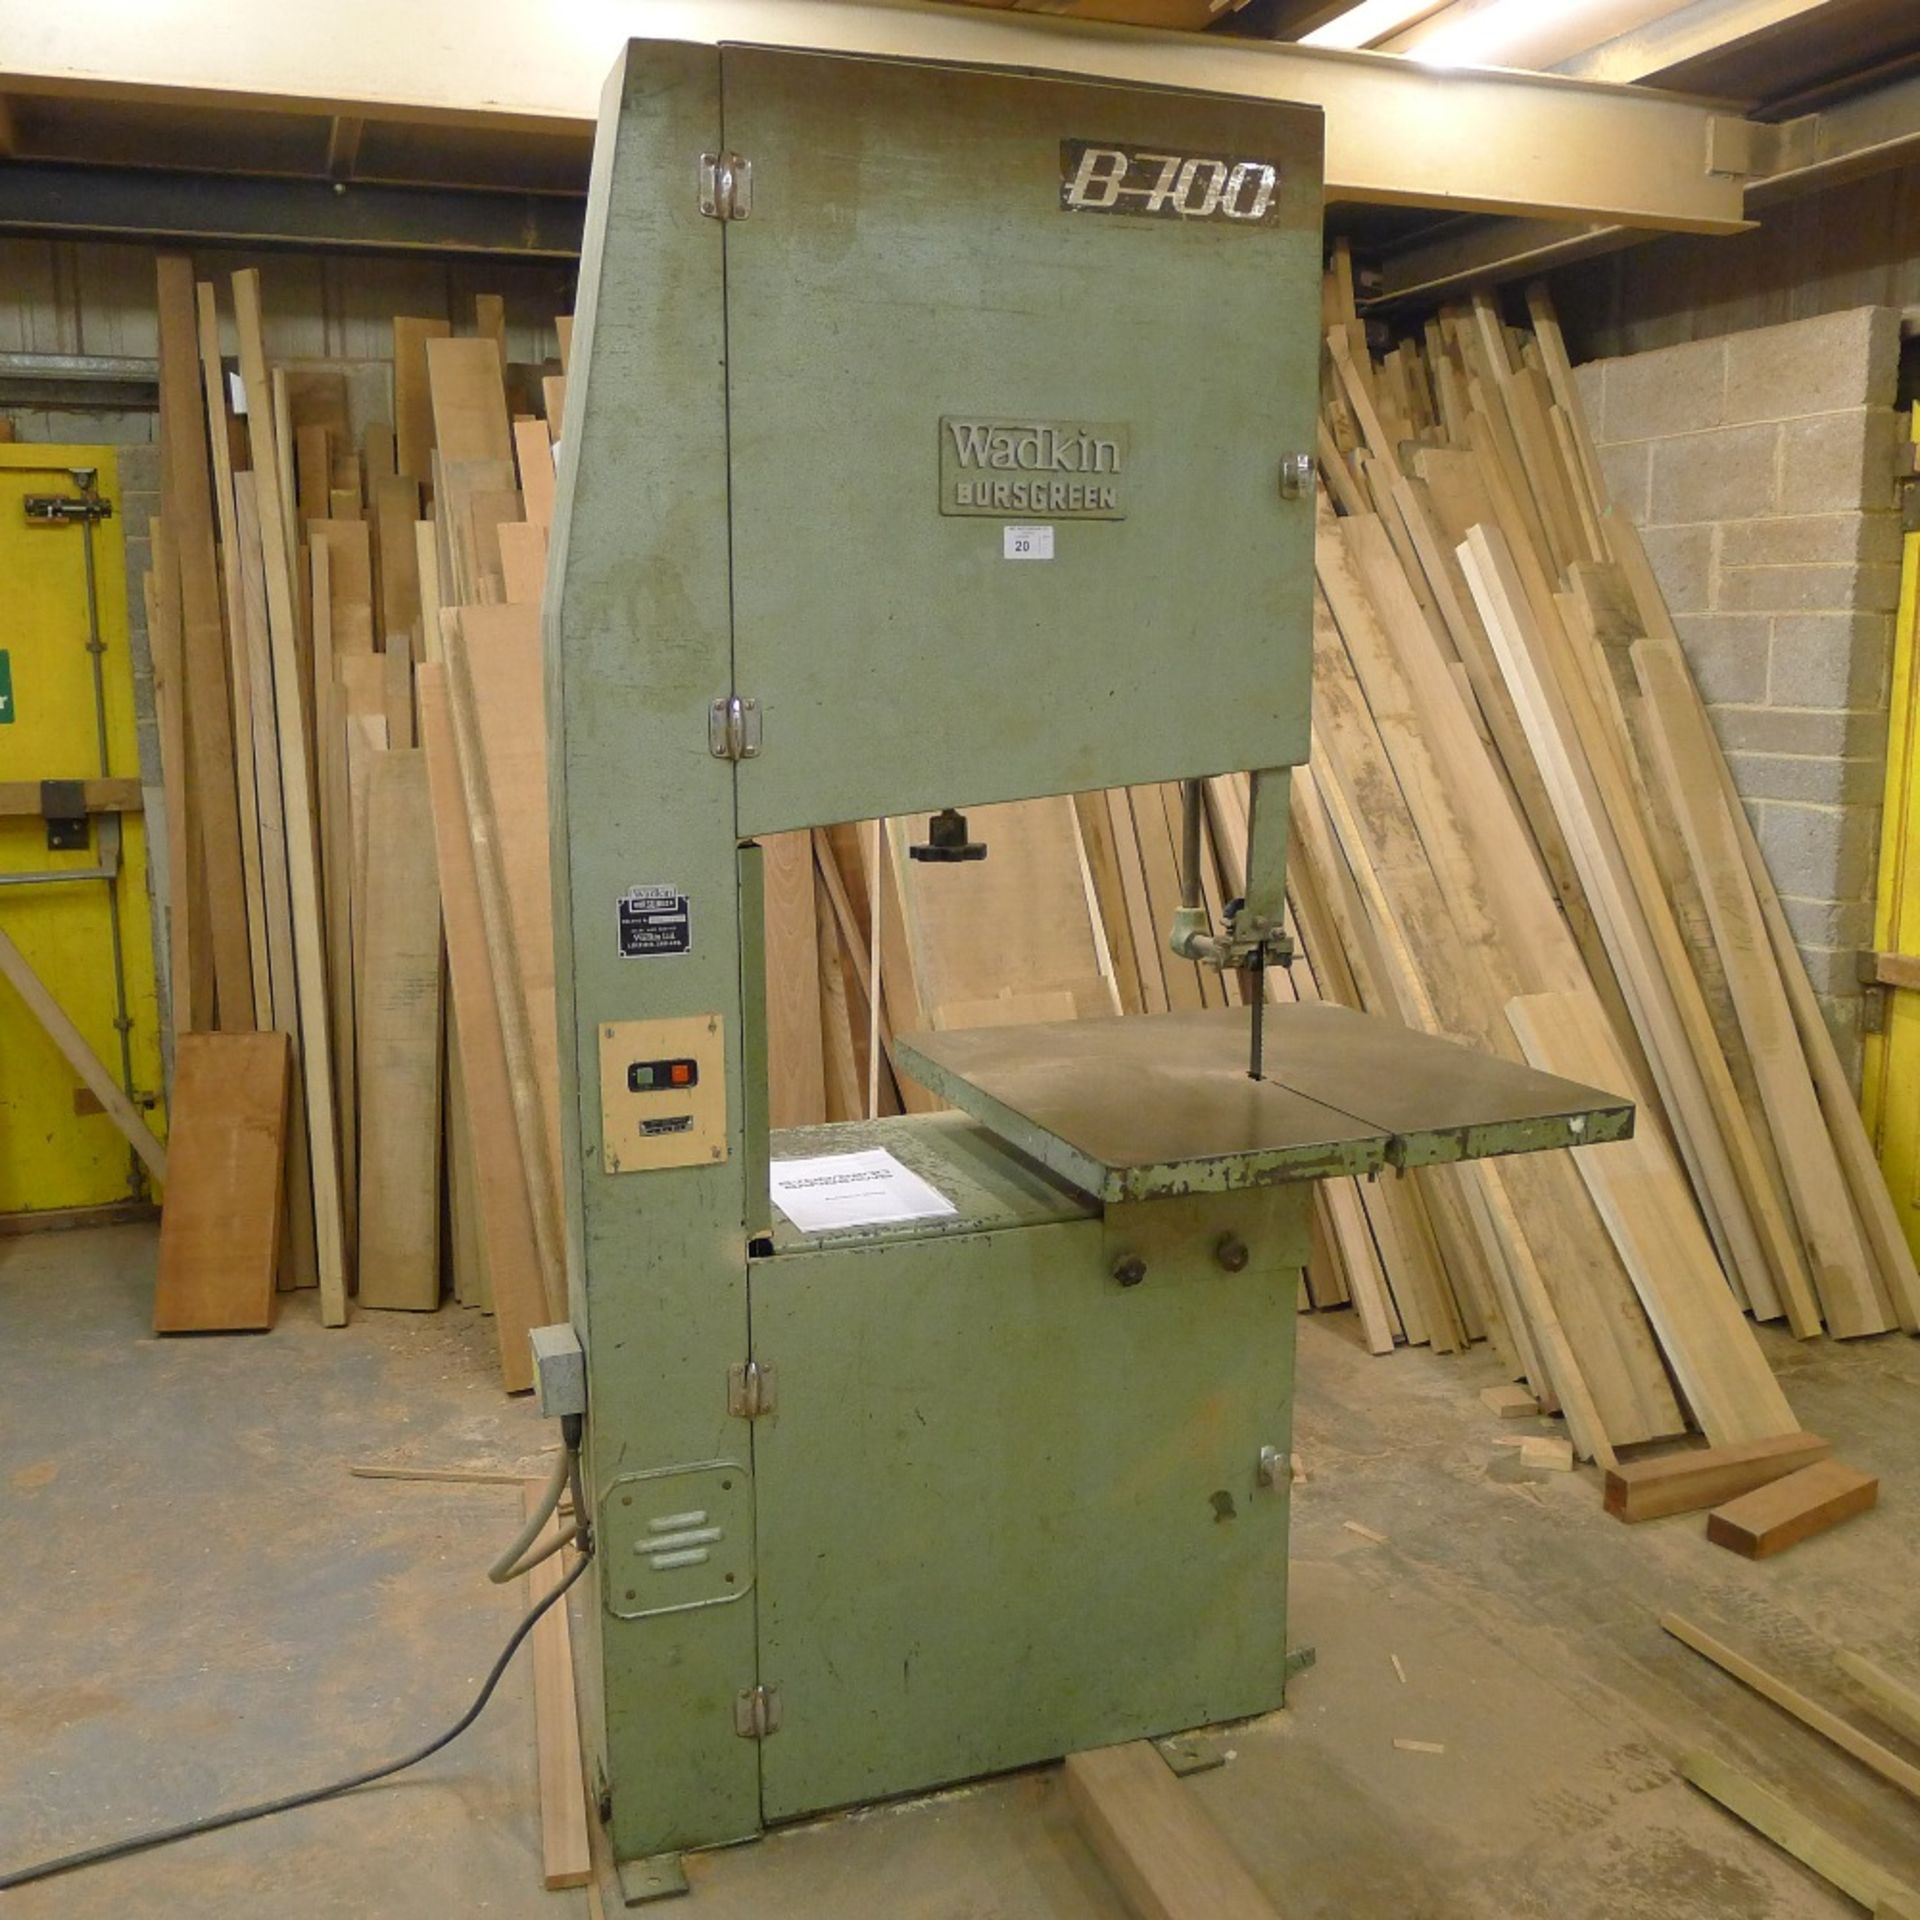 1 Wadkin Bursgreen band saw type B700 no. 72240, 3ph with 1 blade (fitted) and 5 other spare